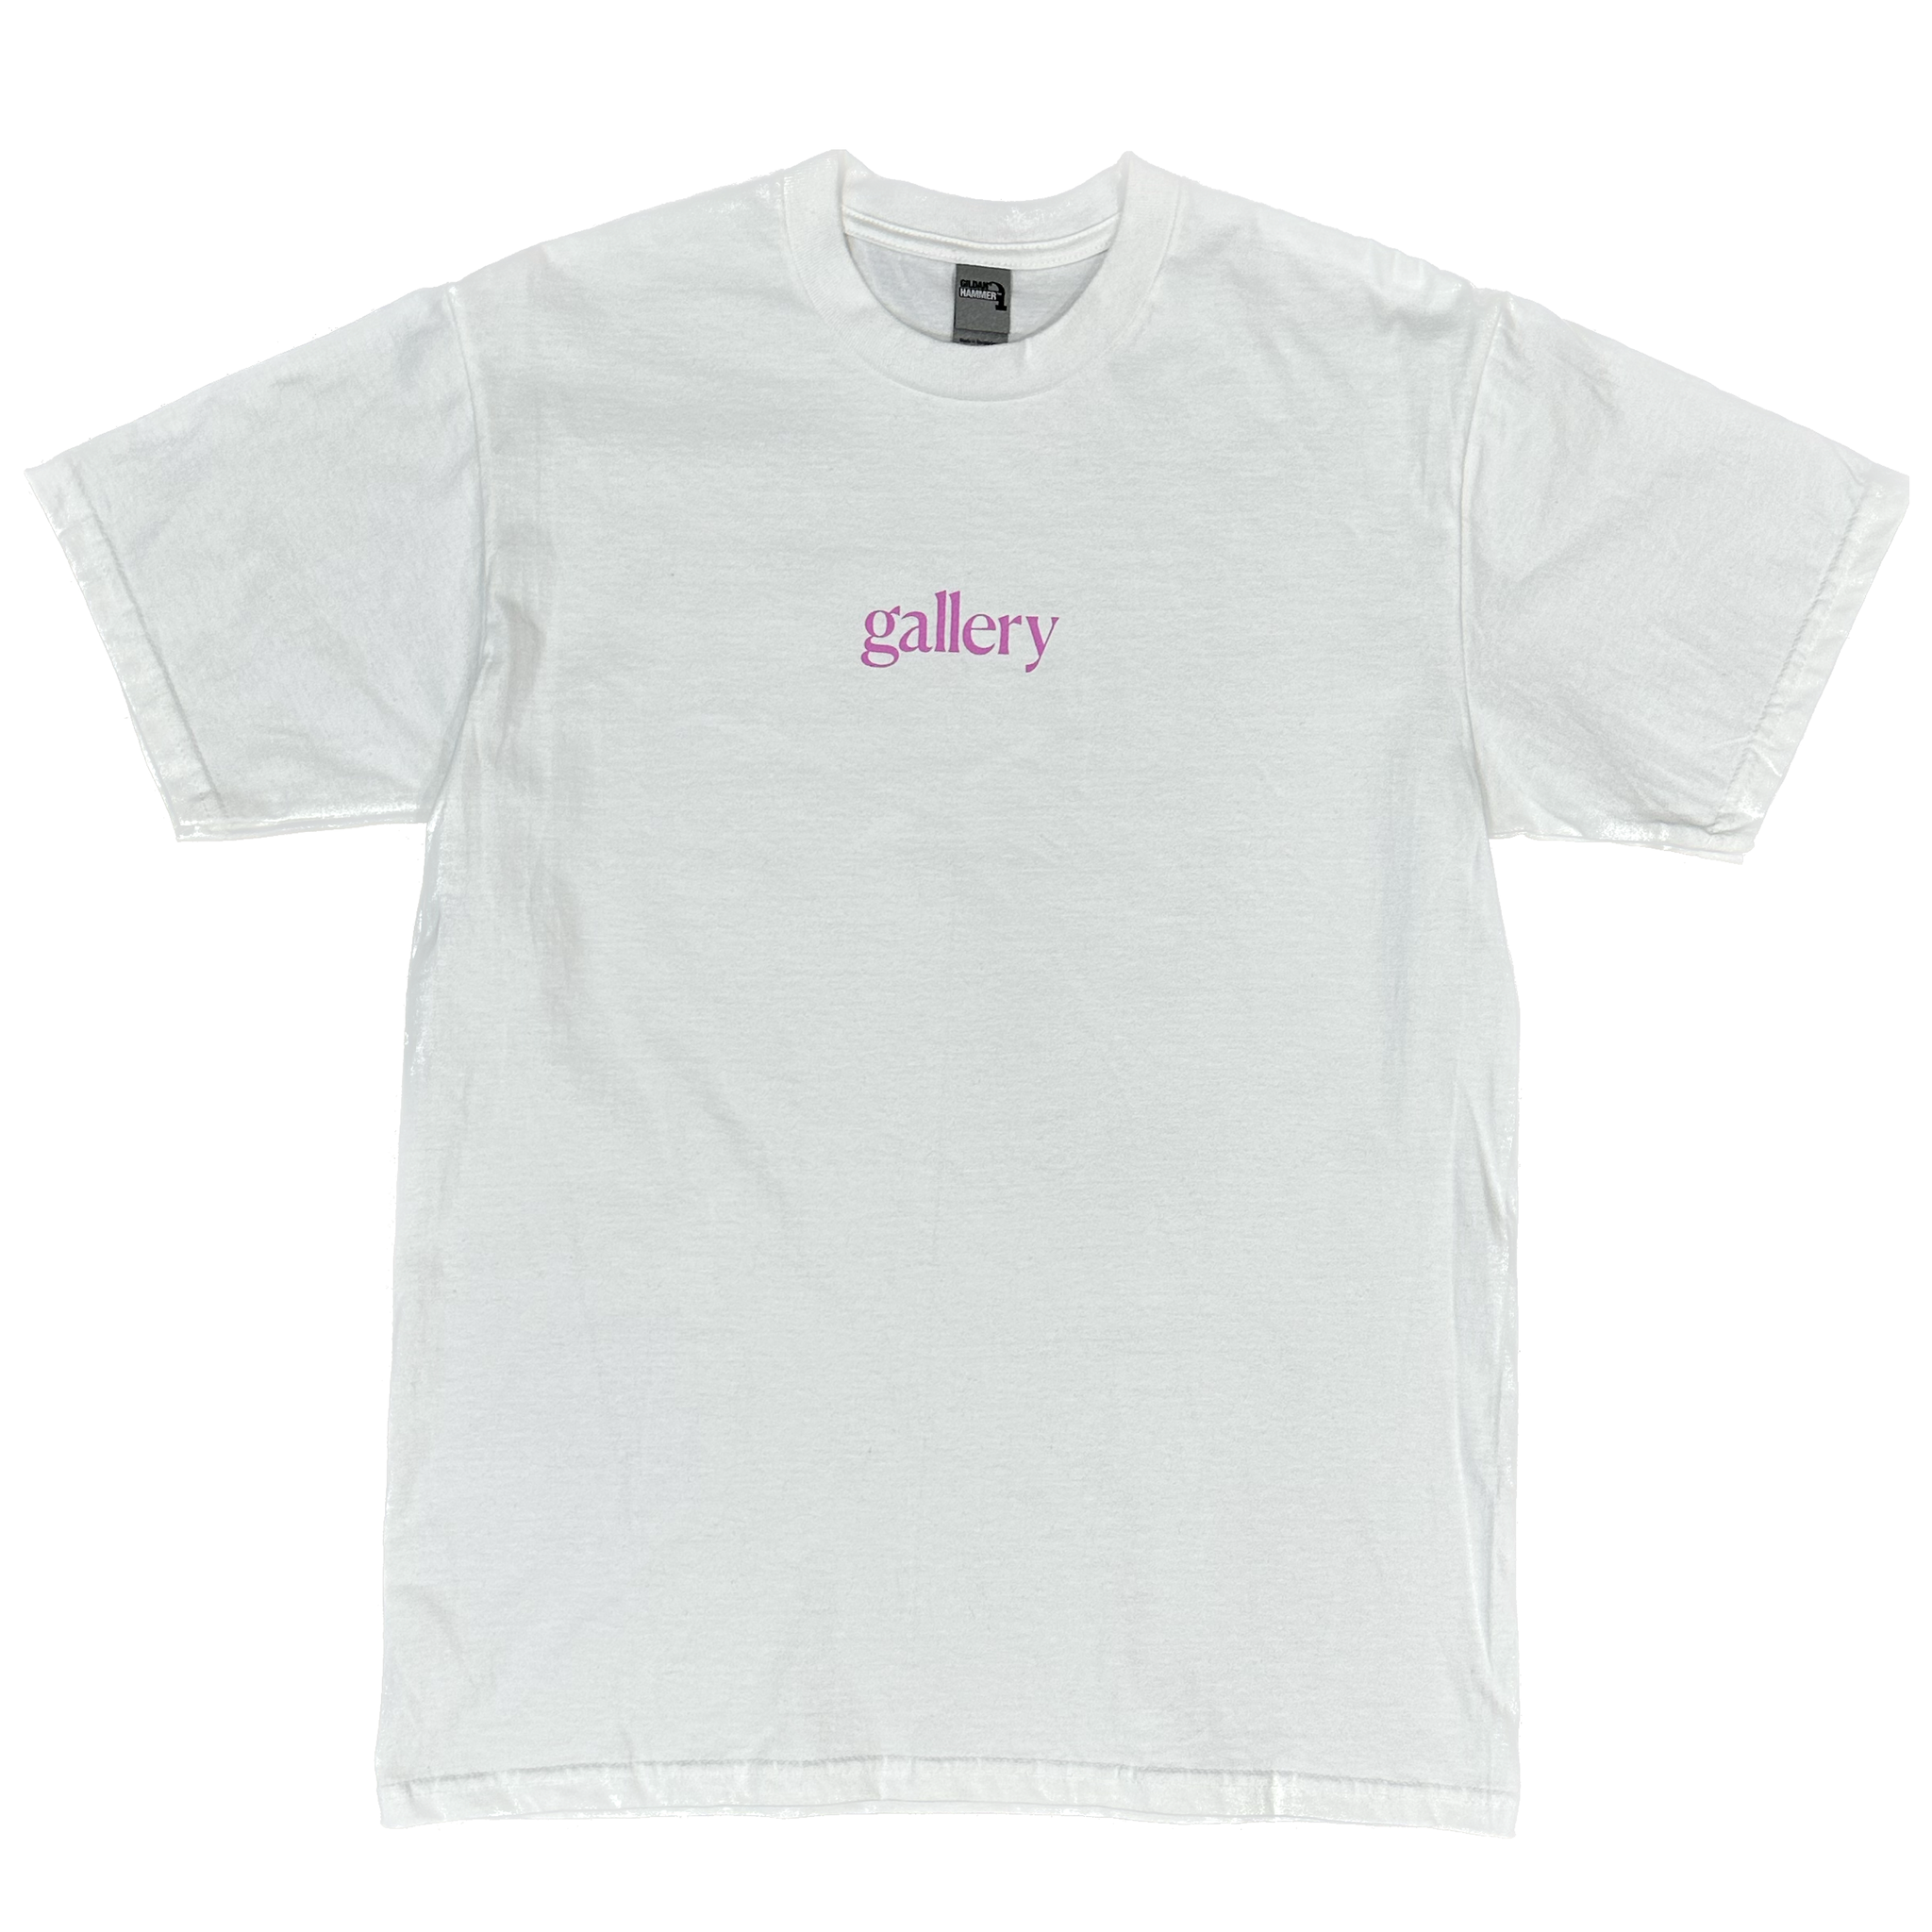 GALLERY DISCOGRAPHY TEE - WHITE